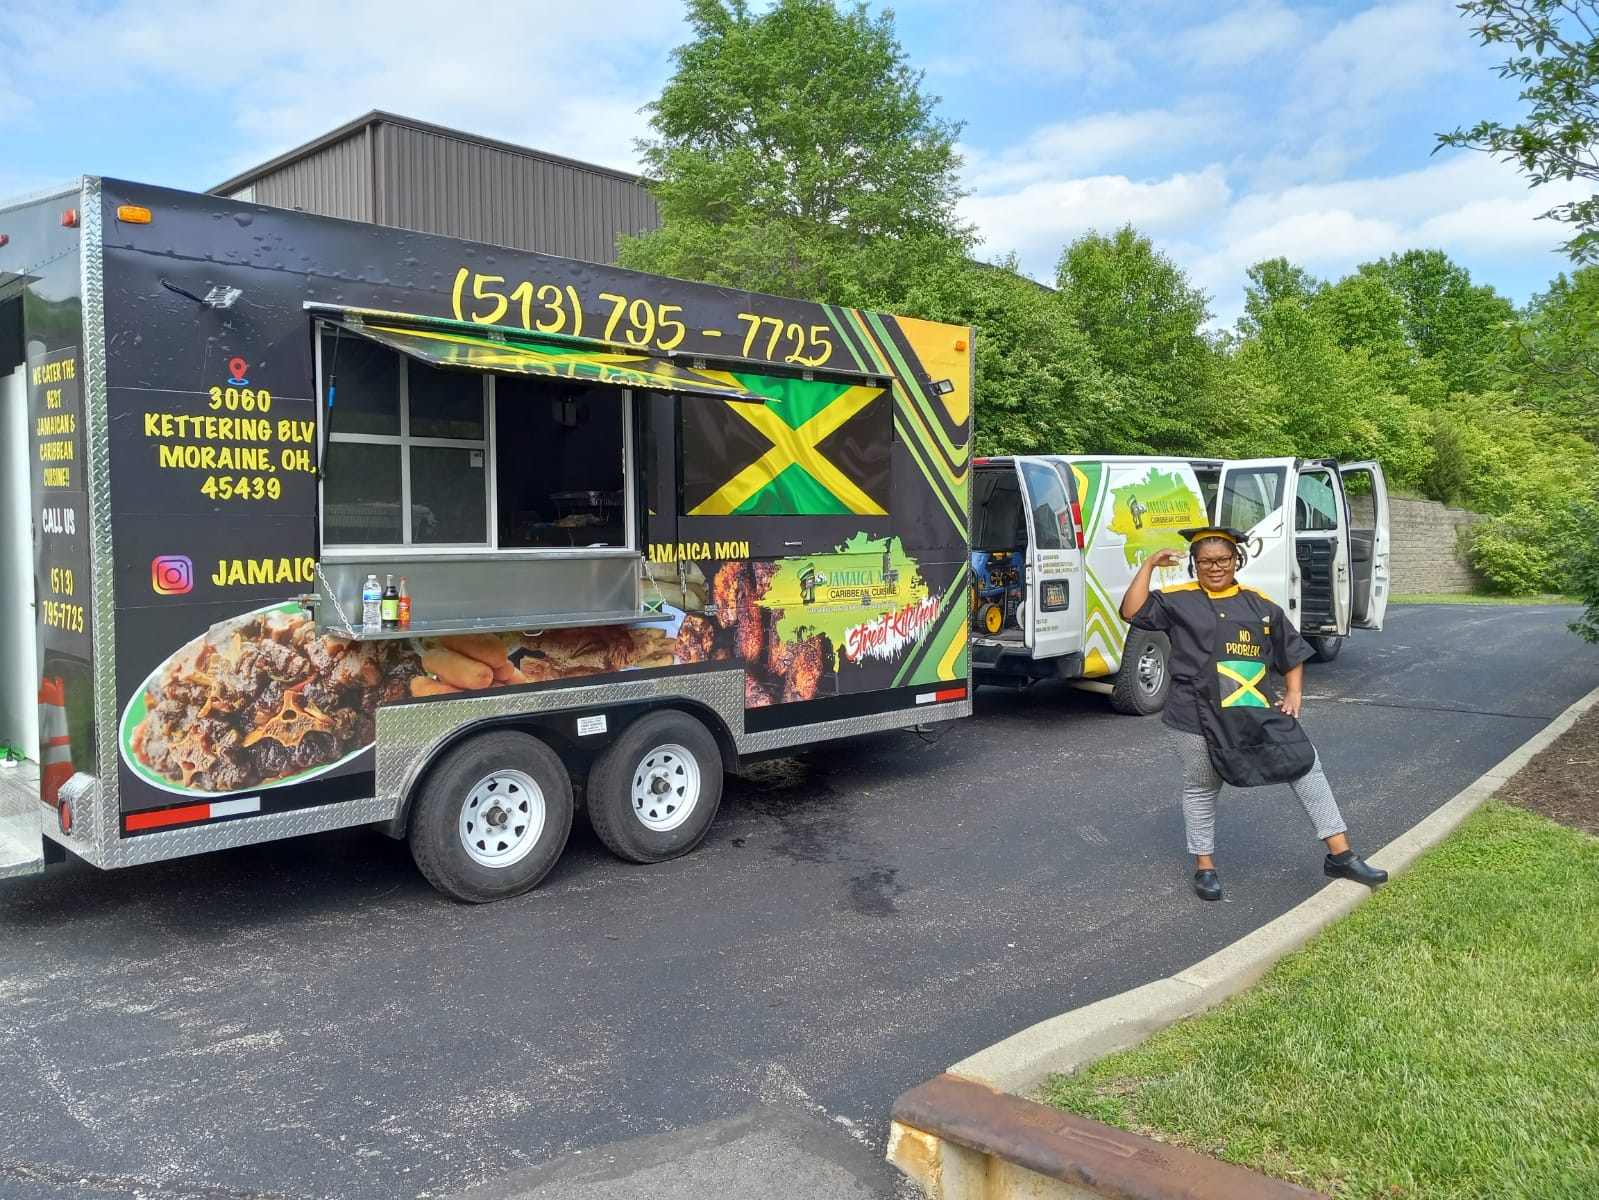 Jamaica Mon Caribbean Cuisine is relocating to Moraine after closing its doors in Fairfield in February.